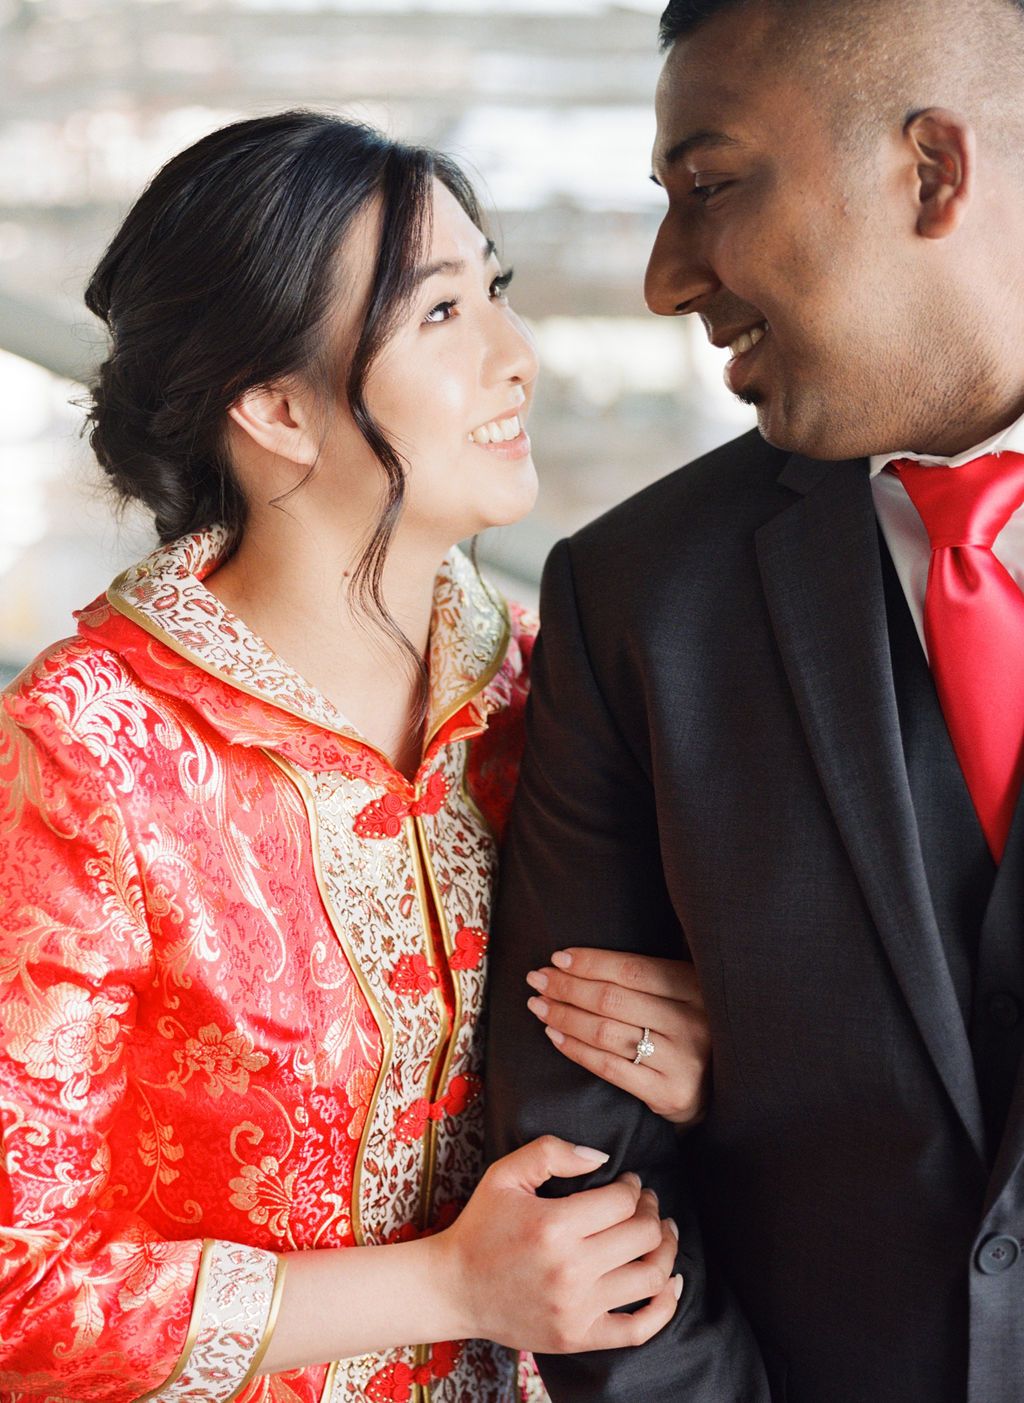  Multicultural wedding inspiration in Vancouver, bride and groom attire with bright red accents